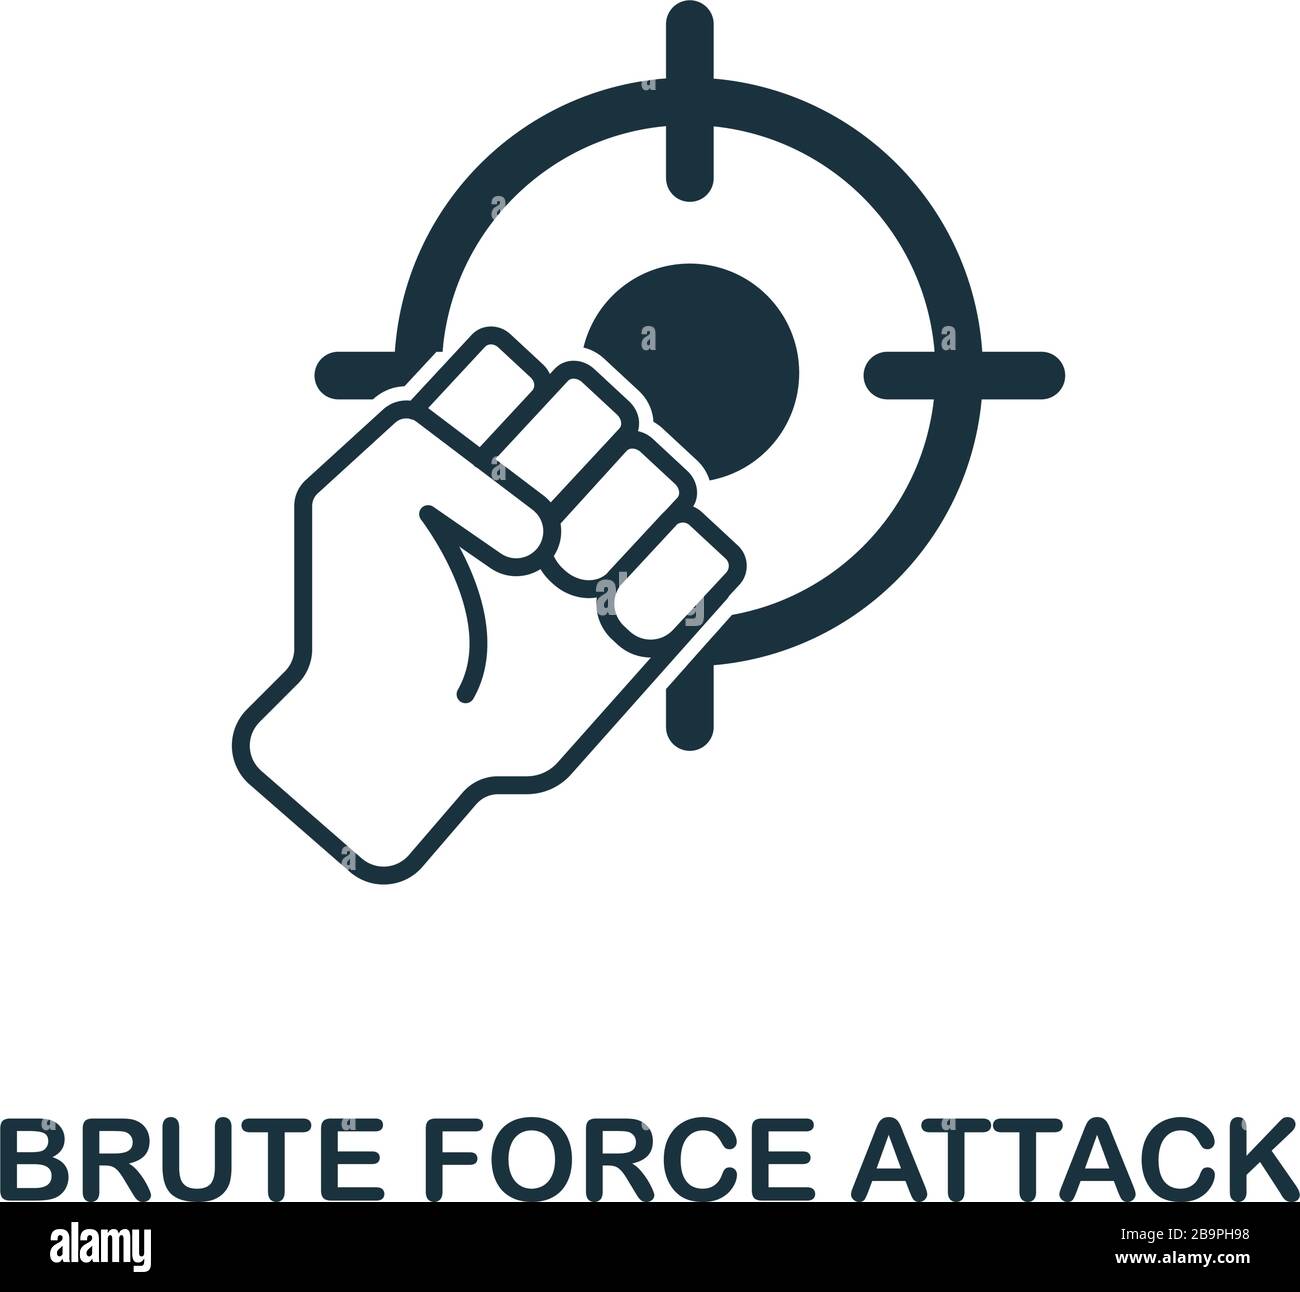 Brute Force Attack icon from banned internet collection. Simple line Brute Force Attack icon for templates, web design and infographics Stock Vector